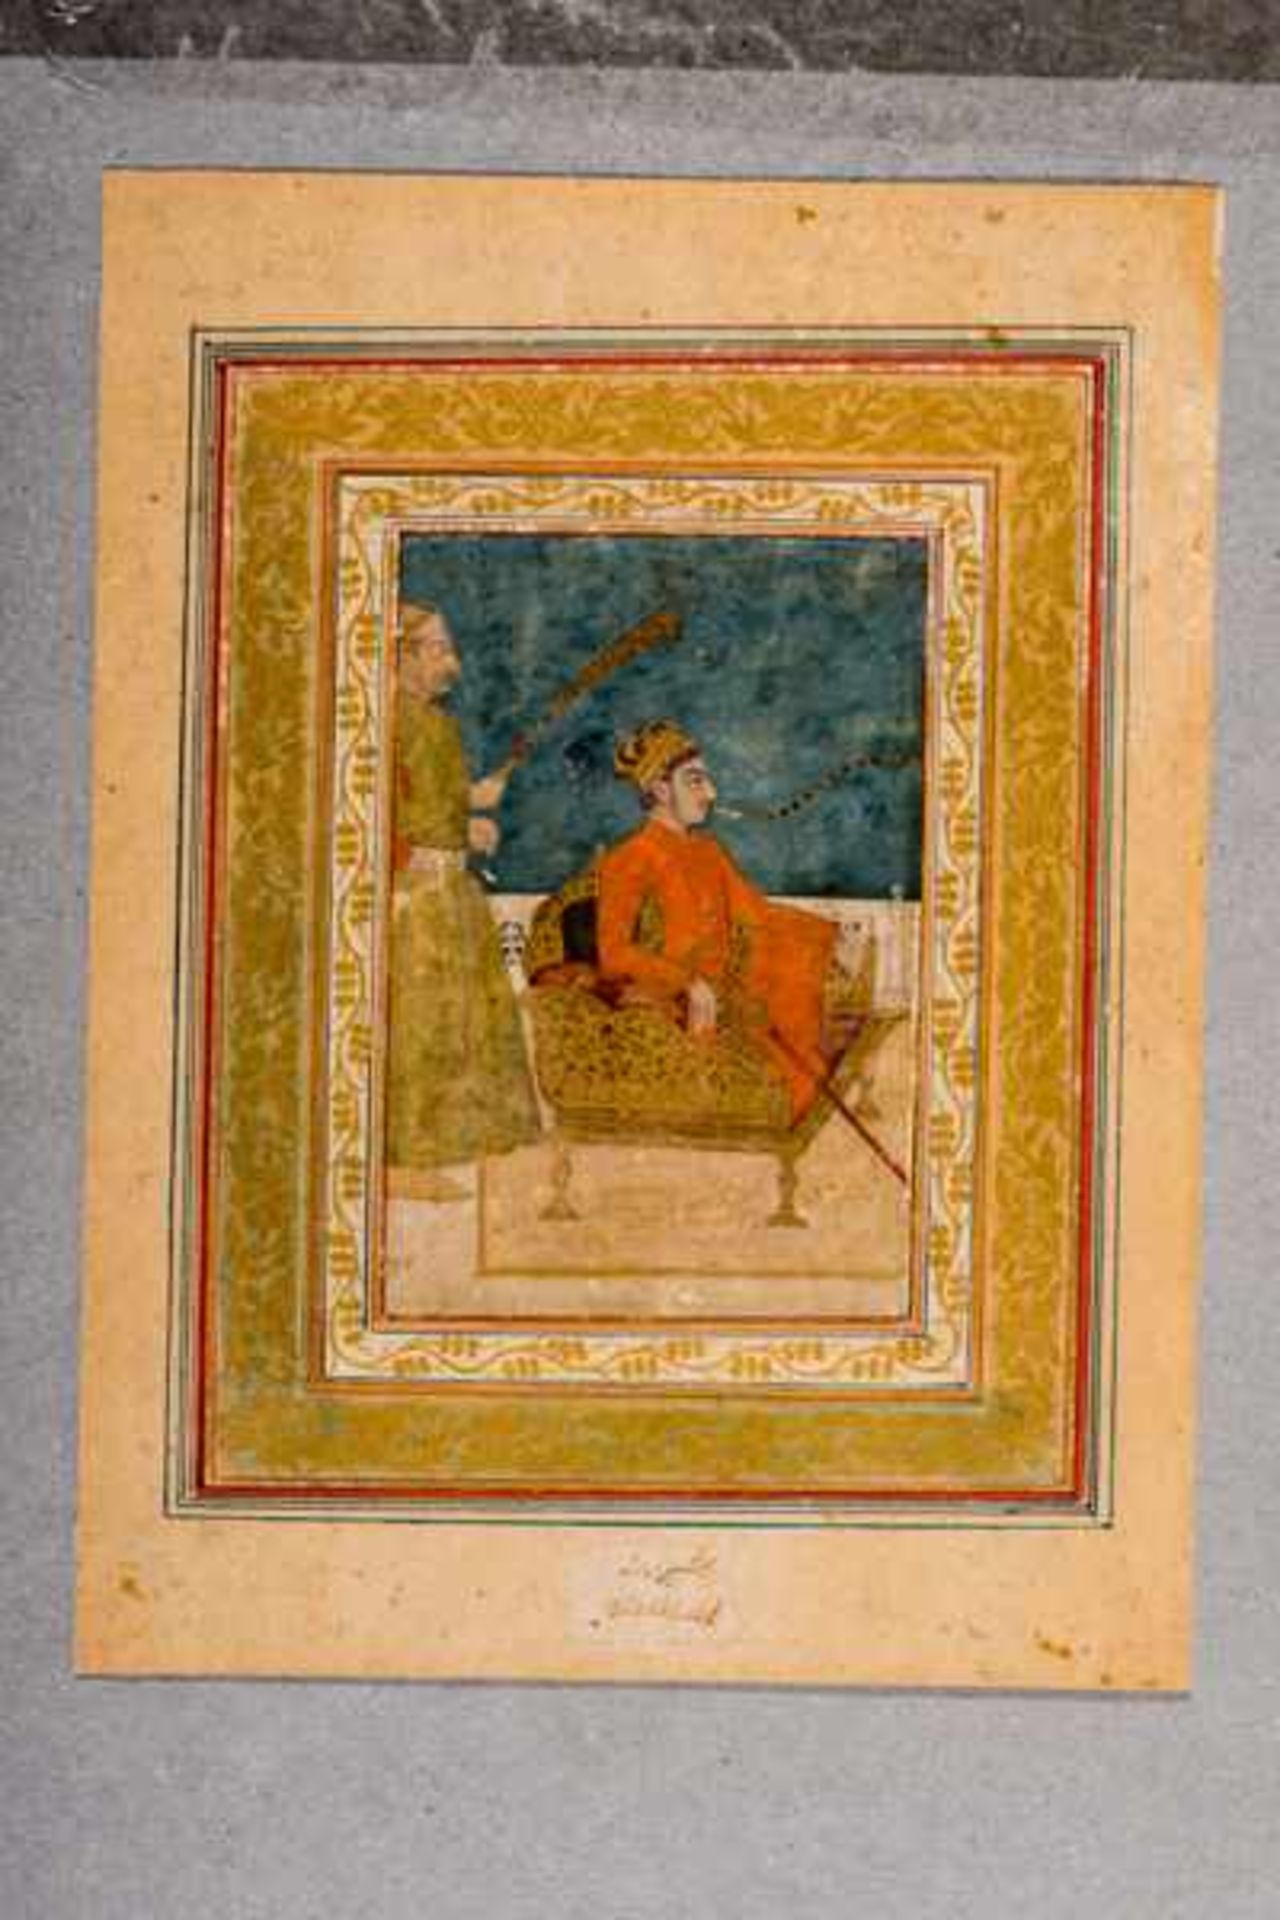 MUHAMMAD SHAH ON THE THRONE Paint on paper, gilding. India, about 1720This image depicts the young - Image 2 of 2